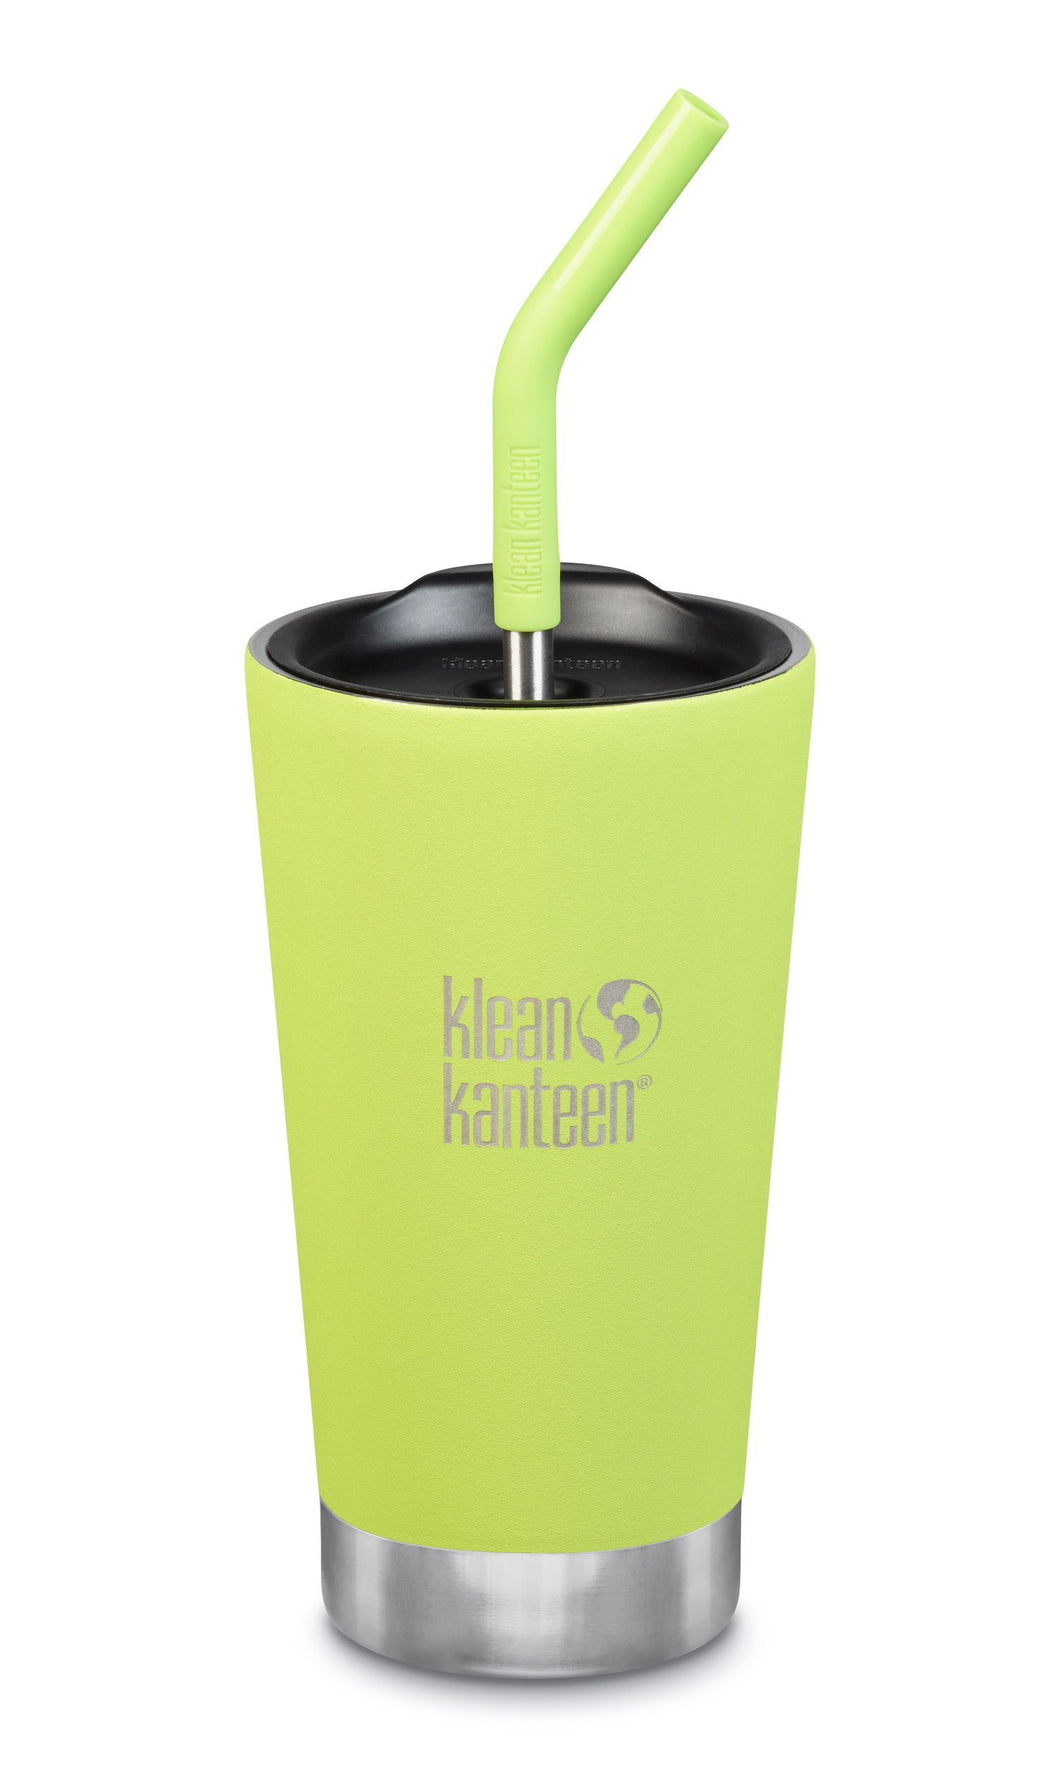 Klean Kanteen - Insulated Tumbler 16 oz with Straw Lid